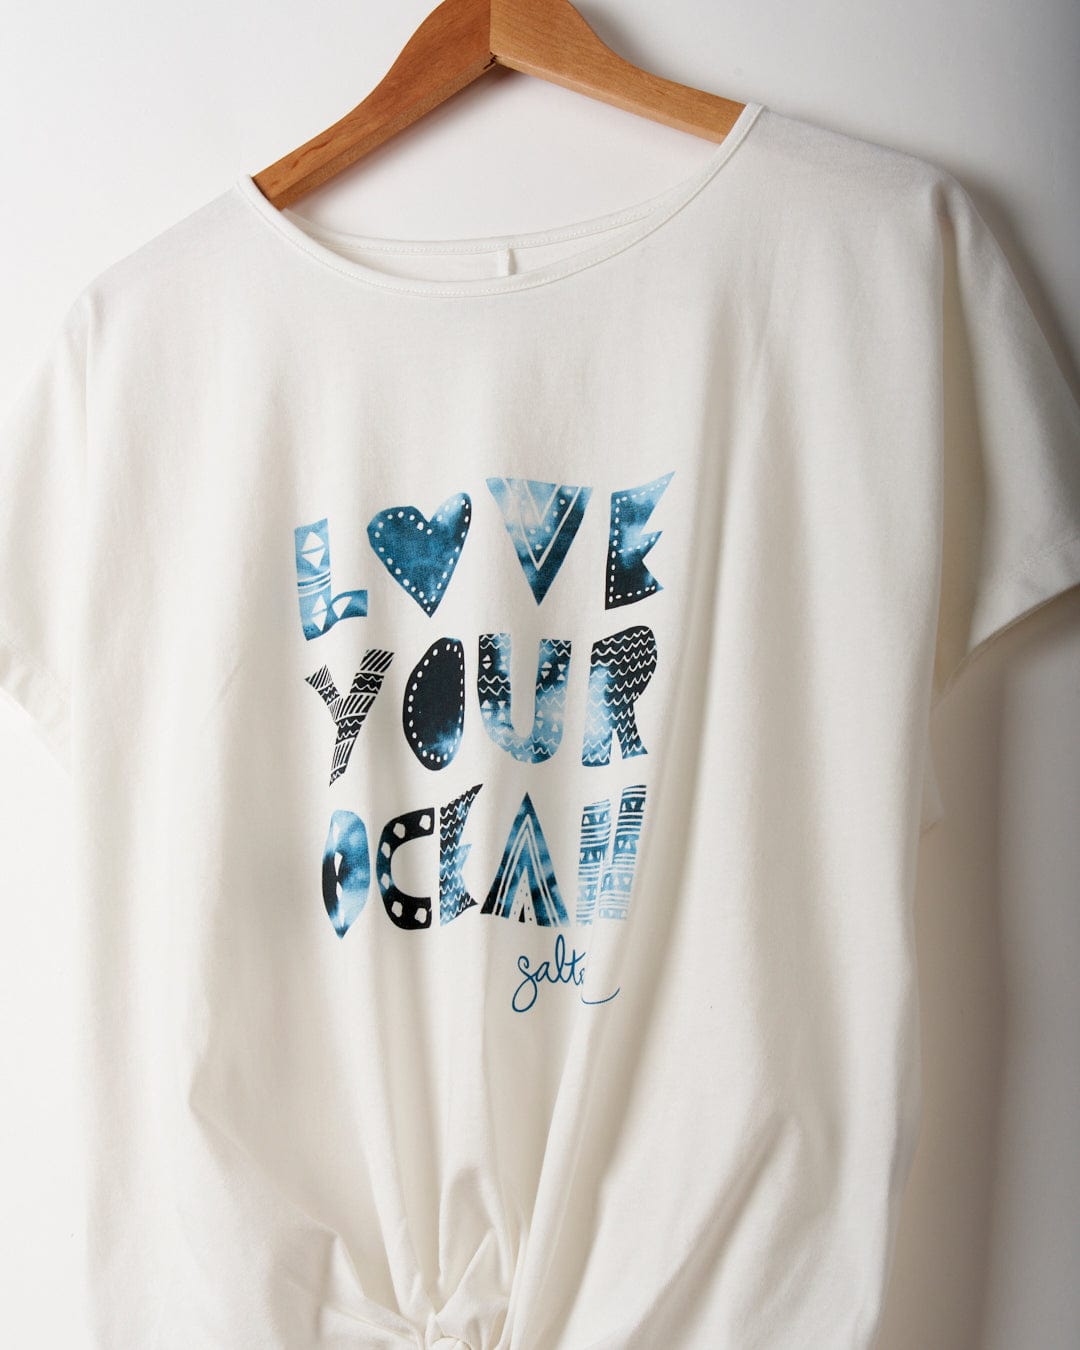 A white, loose fit T-shirt on a wooden hanger with "Love Your Ocean" written in blue patterned letters, featuring a small signature reading "Salt" at the bottom, made from recycled material. The product is the Love Your Ocean - Recycled Womens T-Shirt - White by Saltrock.